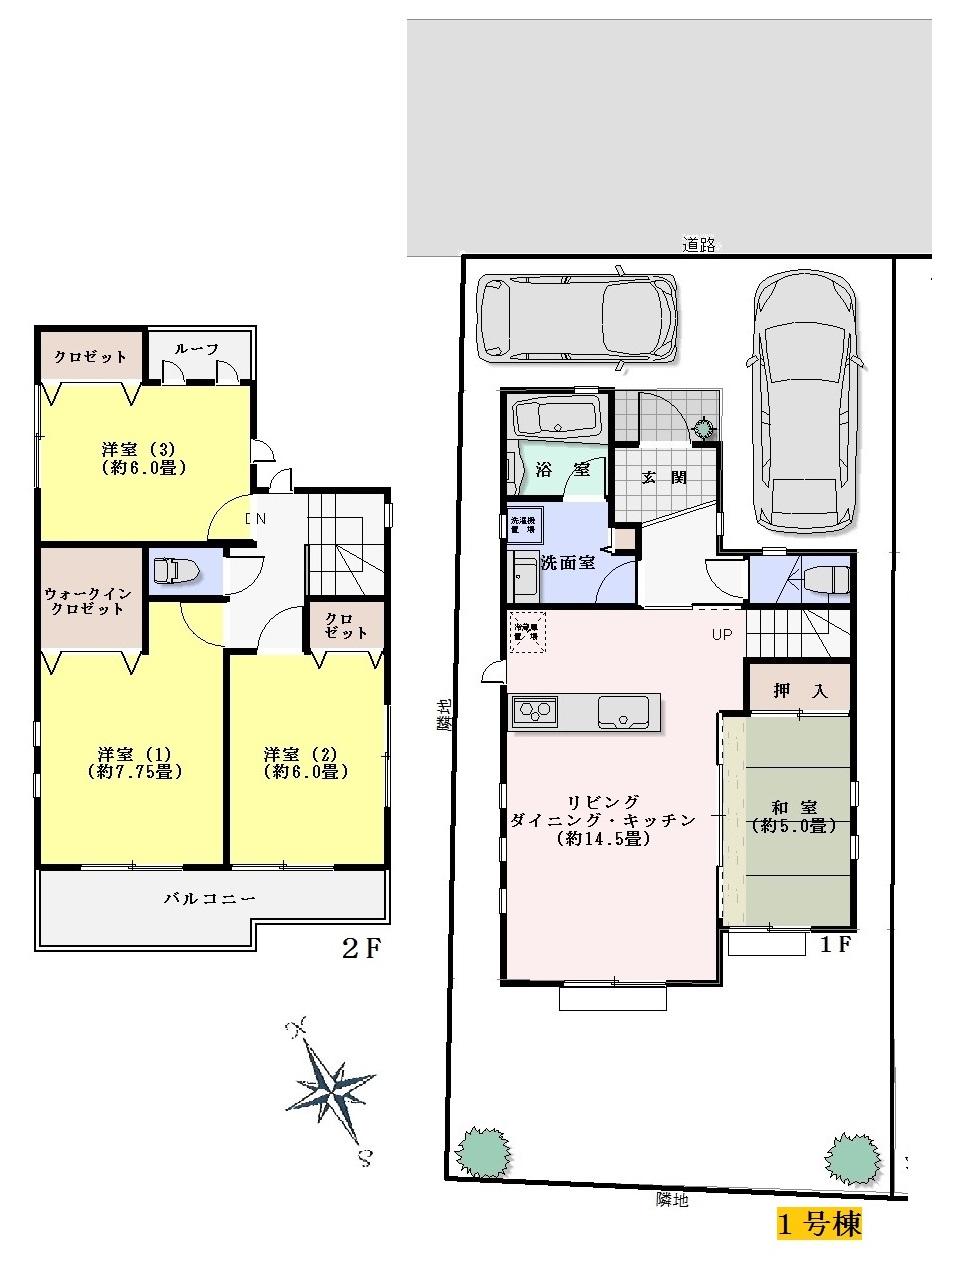 Compartment view + building plan example. Building plan example (No. 1 compartment) 4LDK, Land price 26.5 million yen, Land area 114.74 sq m , Building price 13 million yen, Building area 93.14 sq m